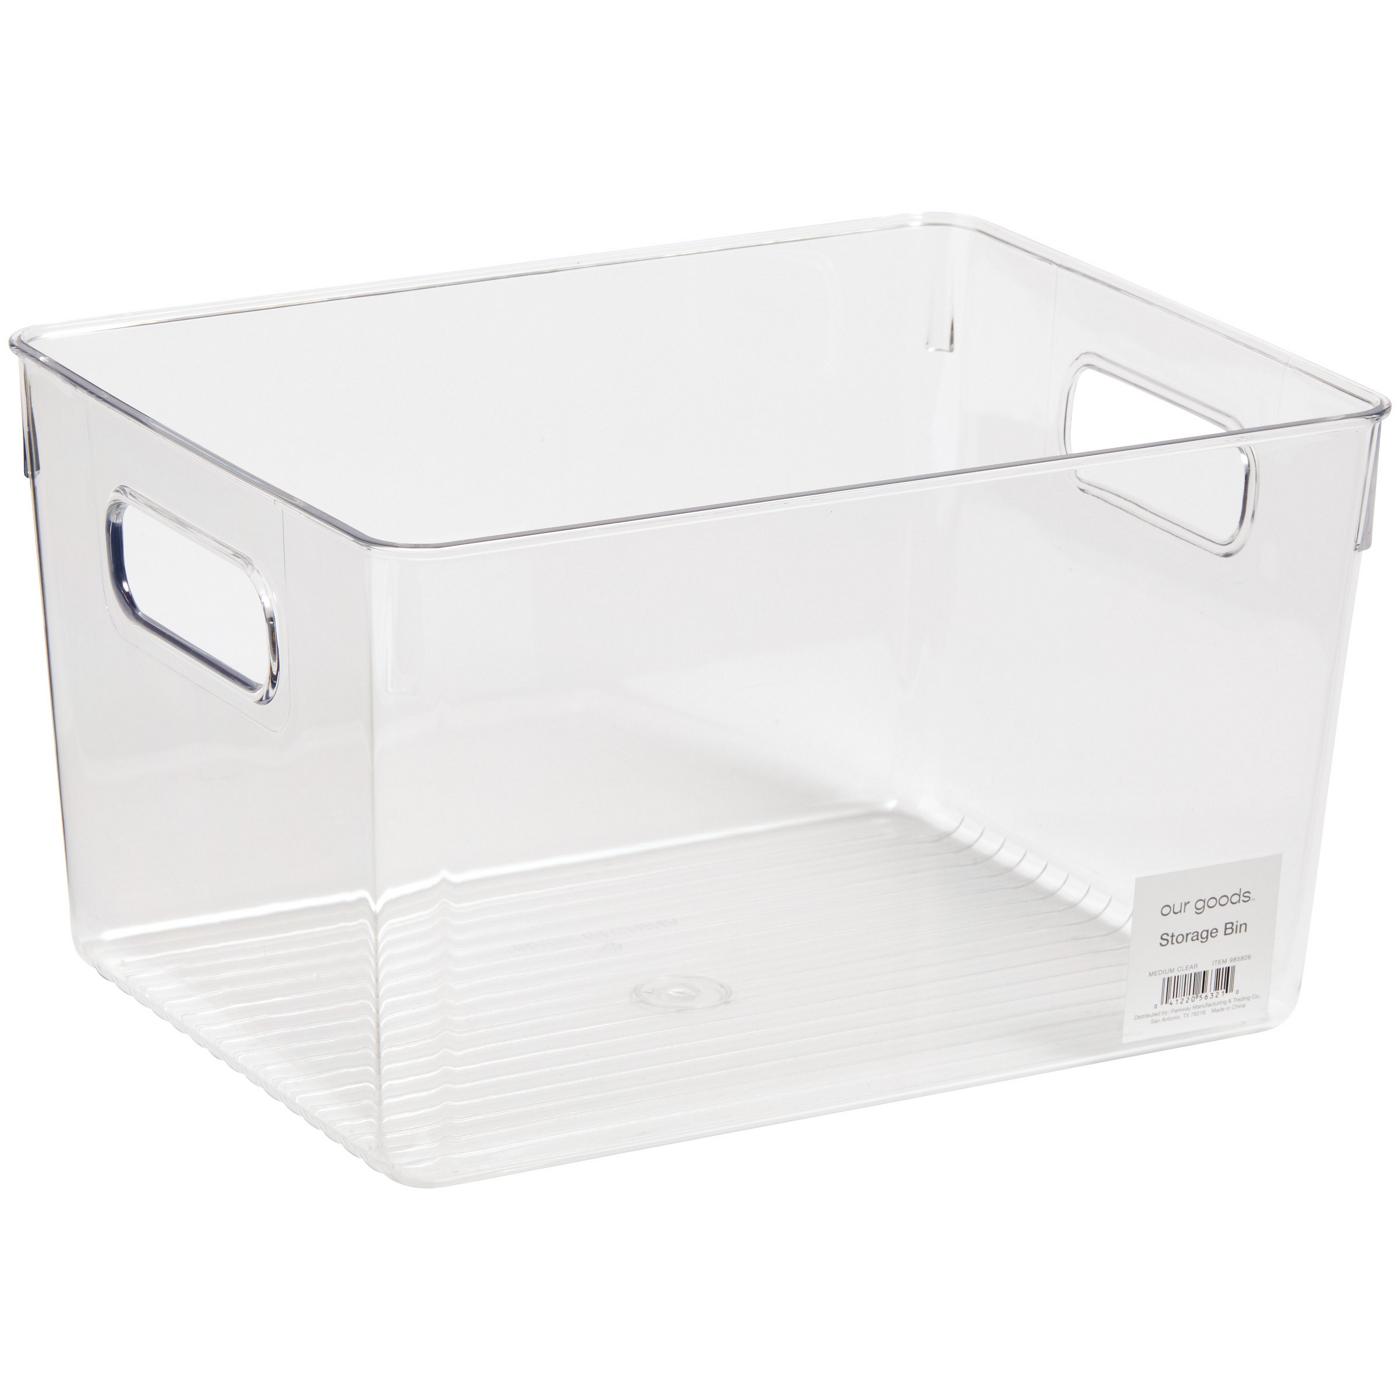 our goods Rectangle Storage Bin - Clear; image 1 of 2